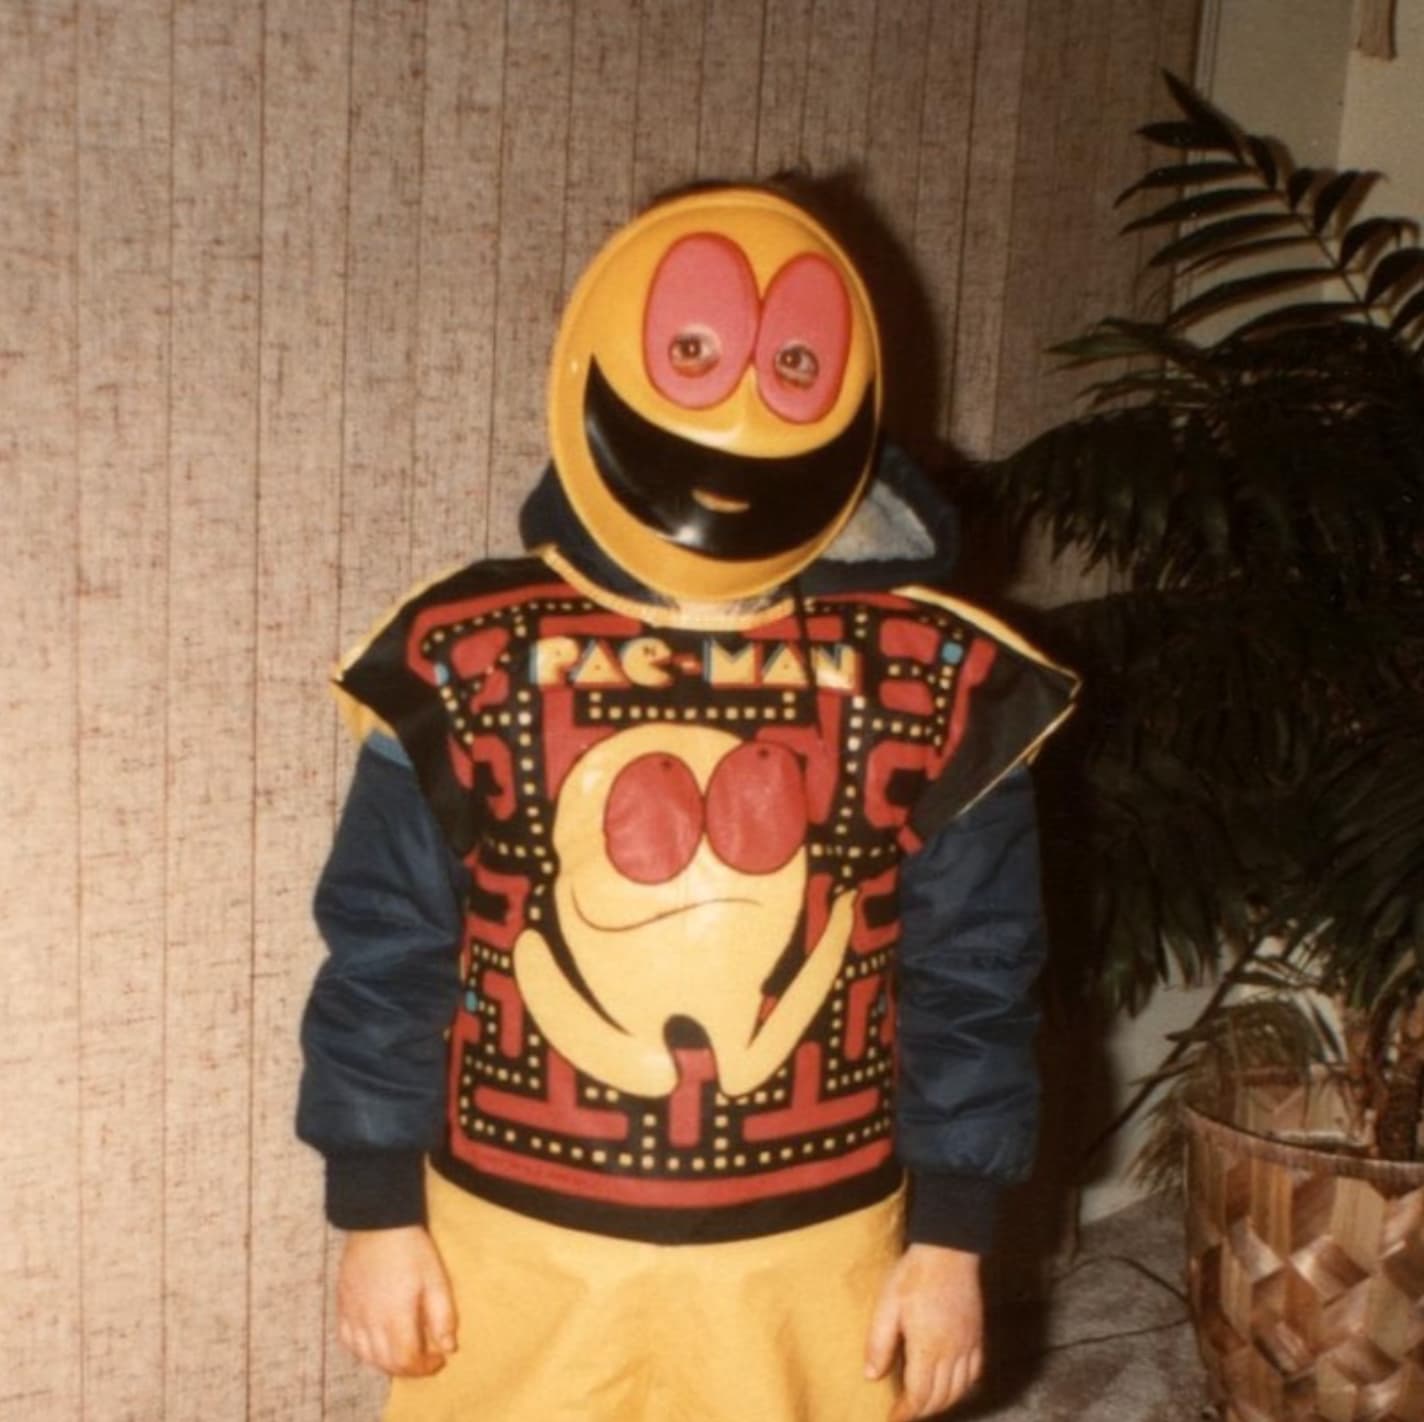 “Halloween early 1980s during ‘Pac-Man Fever.’”